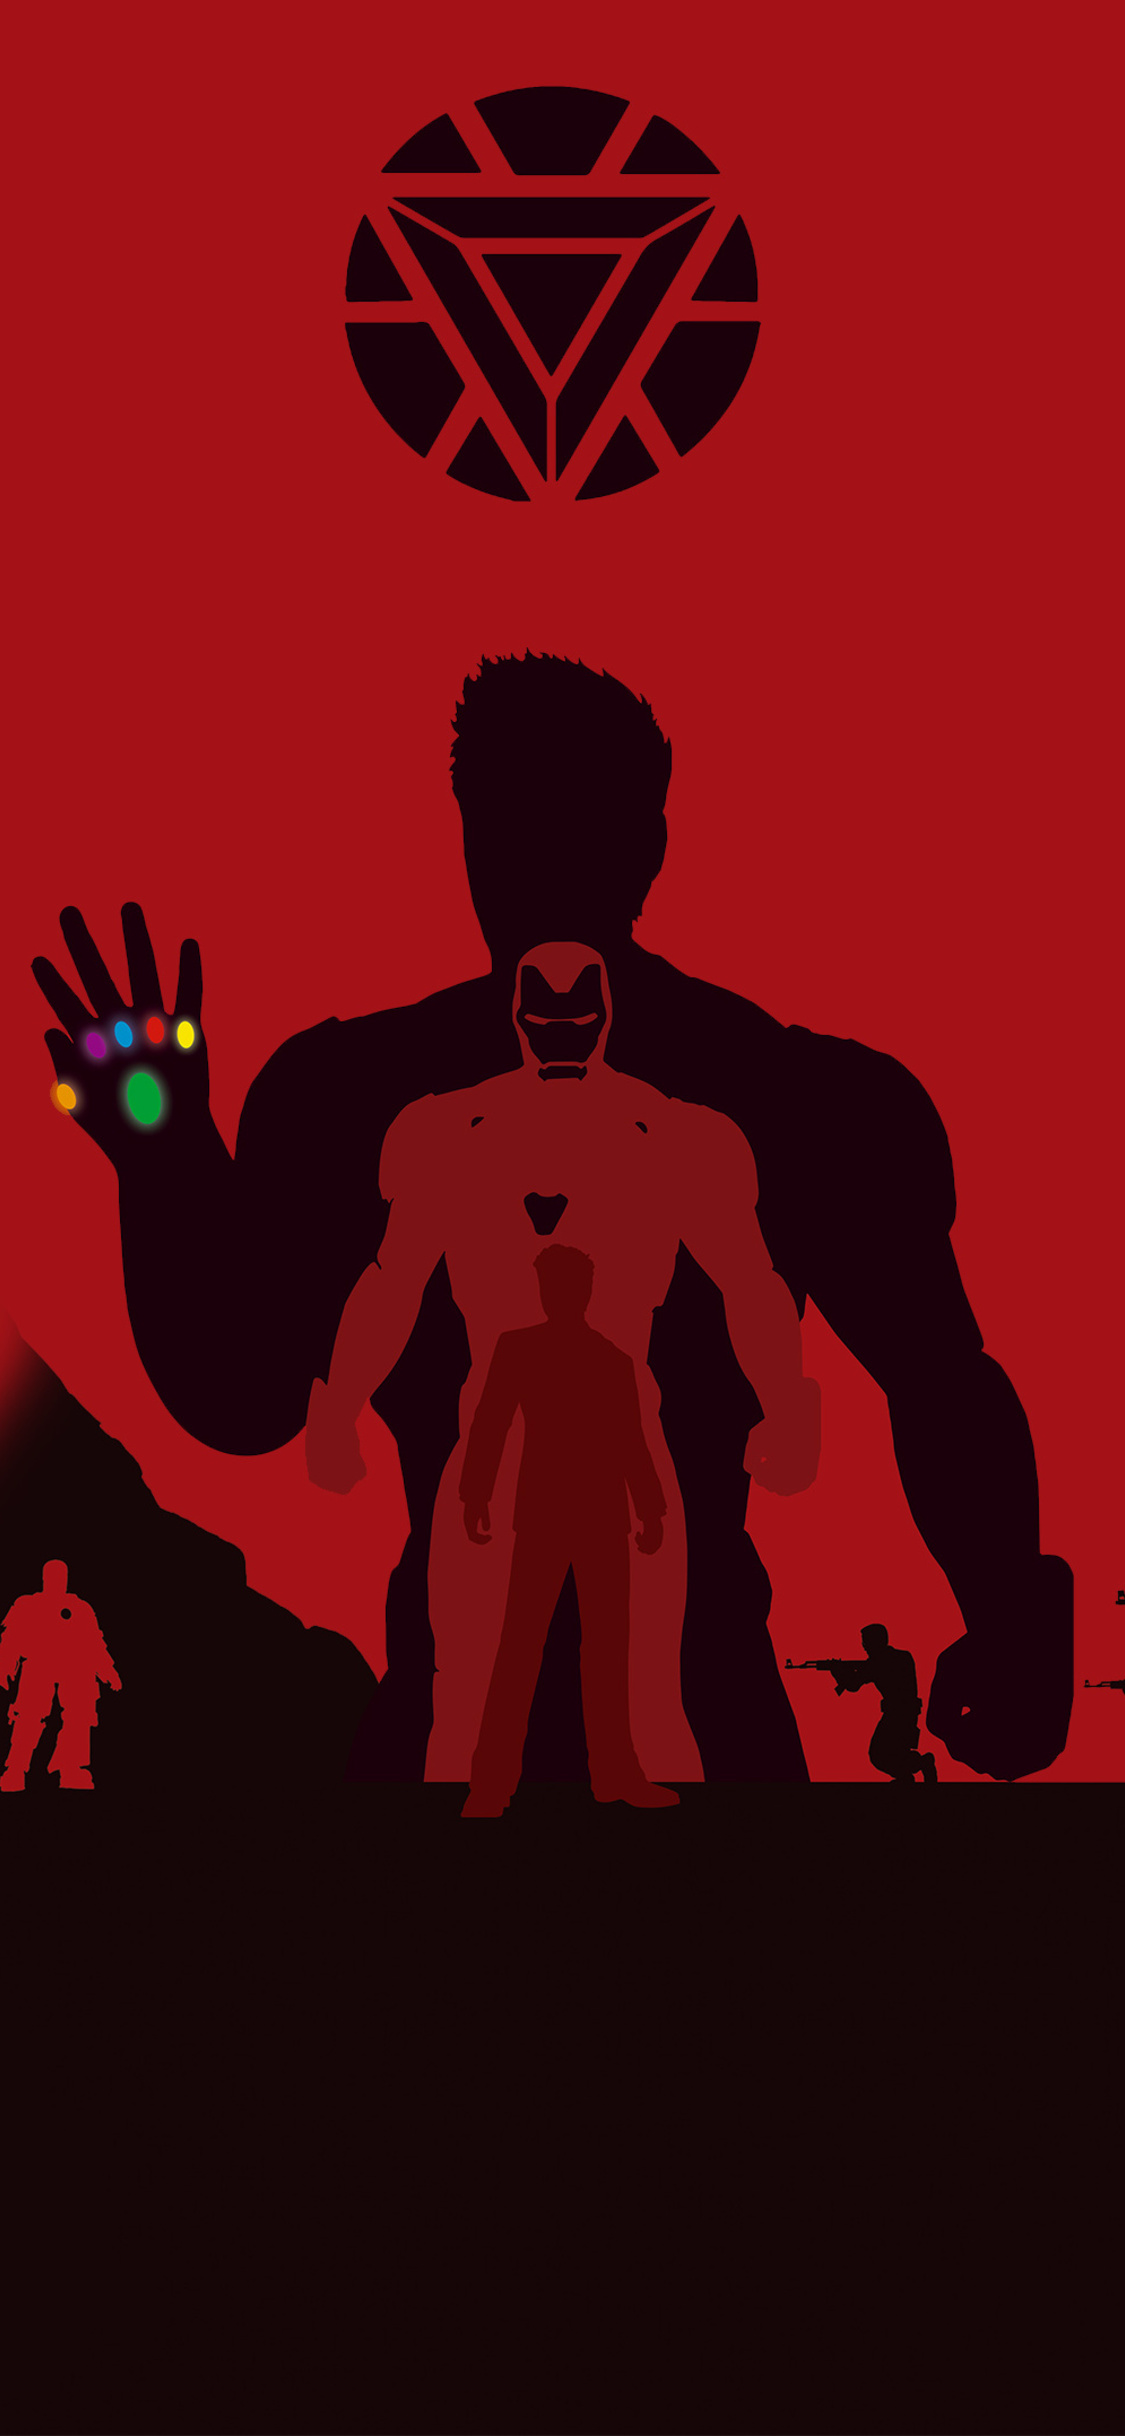 Iron Man Avengers Endgame 4k Minimalism iPhone XS, iPhone iPhone X HD 4k Wallpaper, Image, Background, Photo and Picture